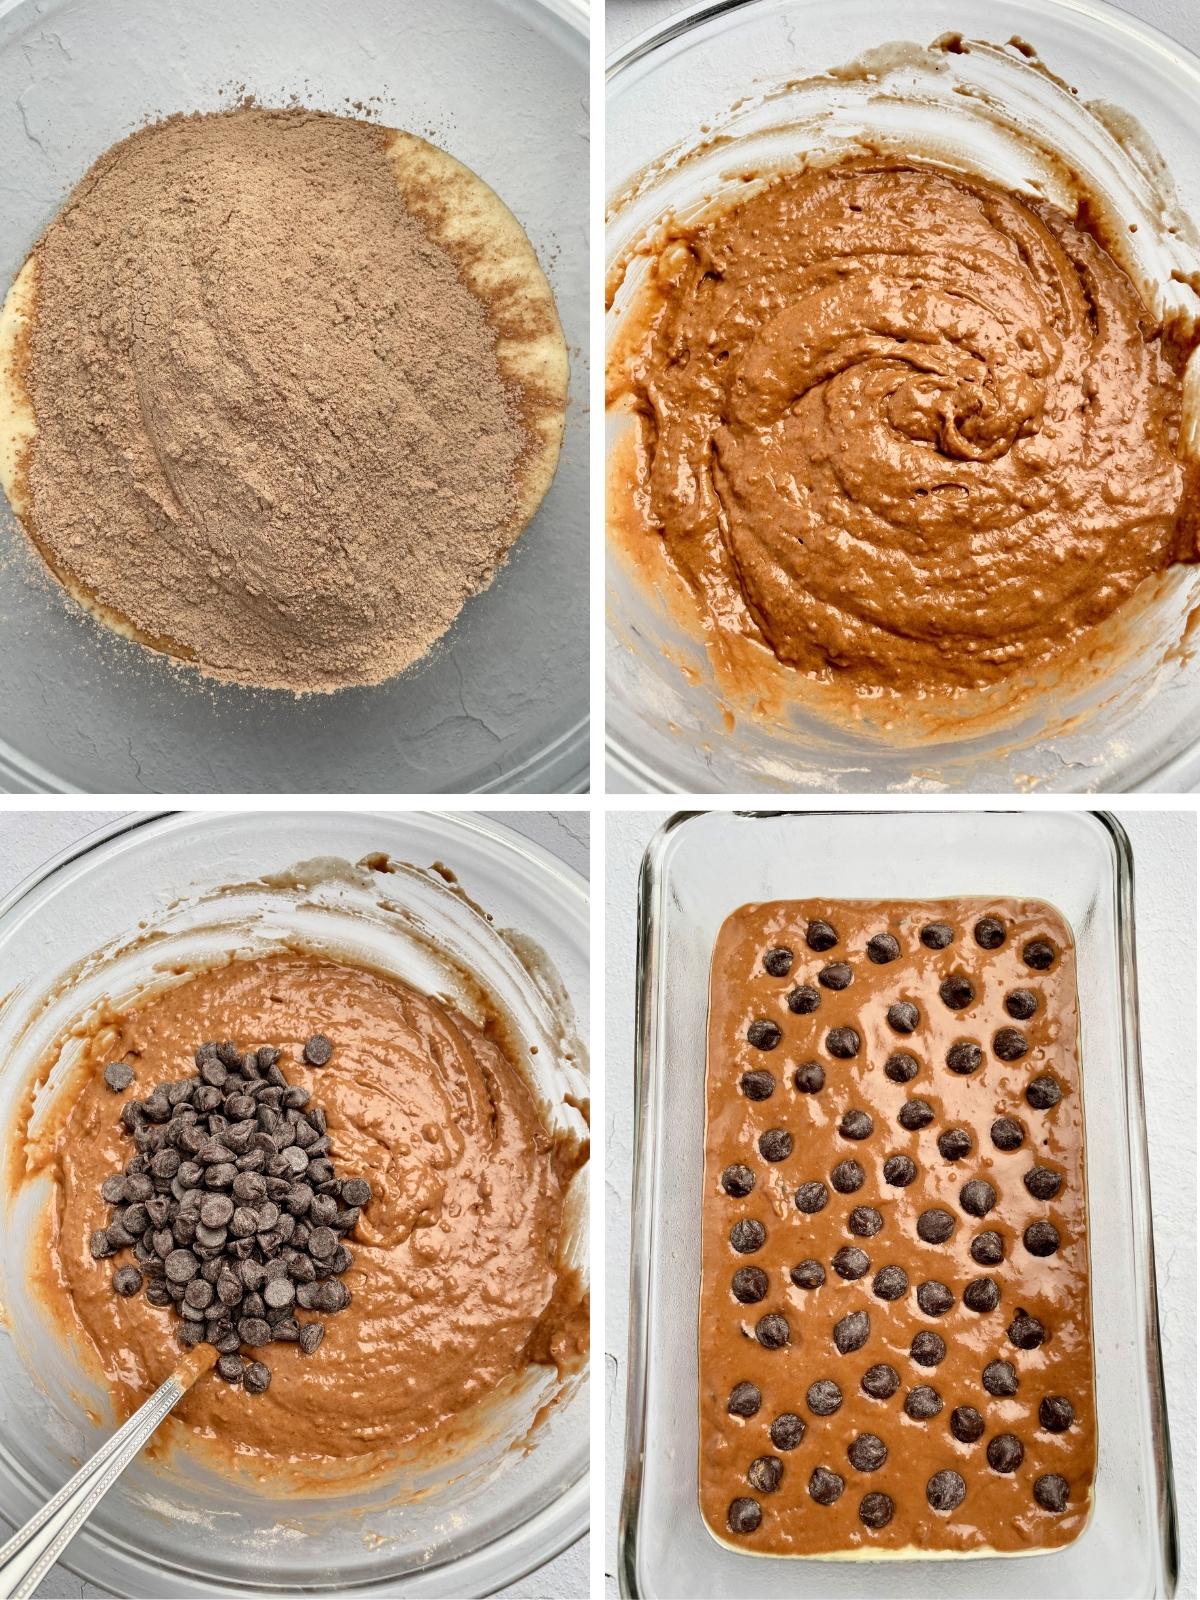 Second set of steps for chocolate loaf.